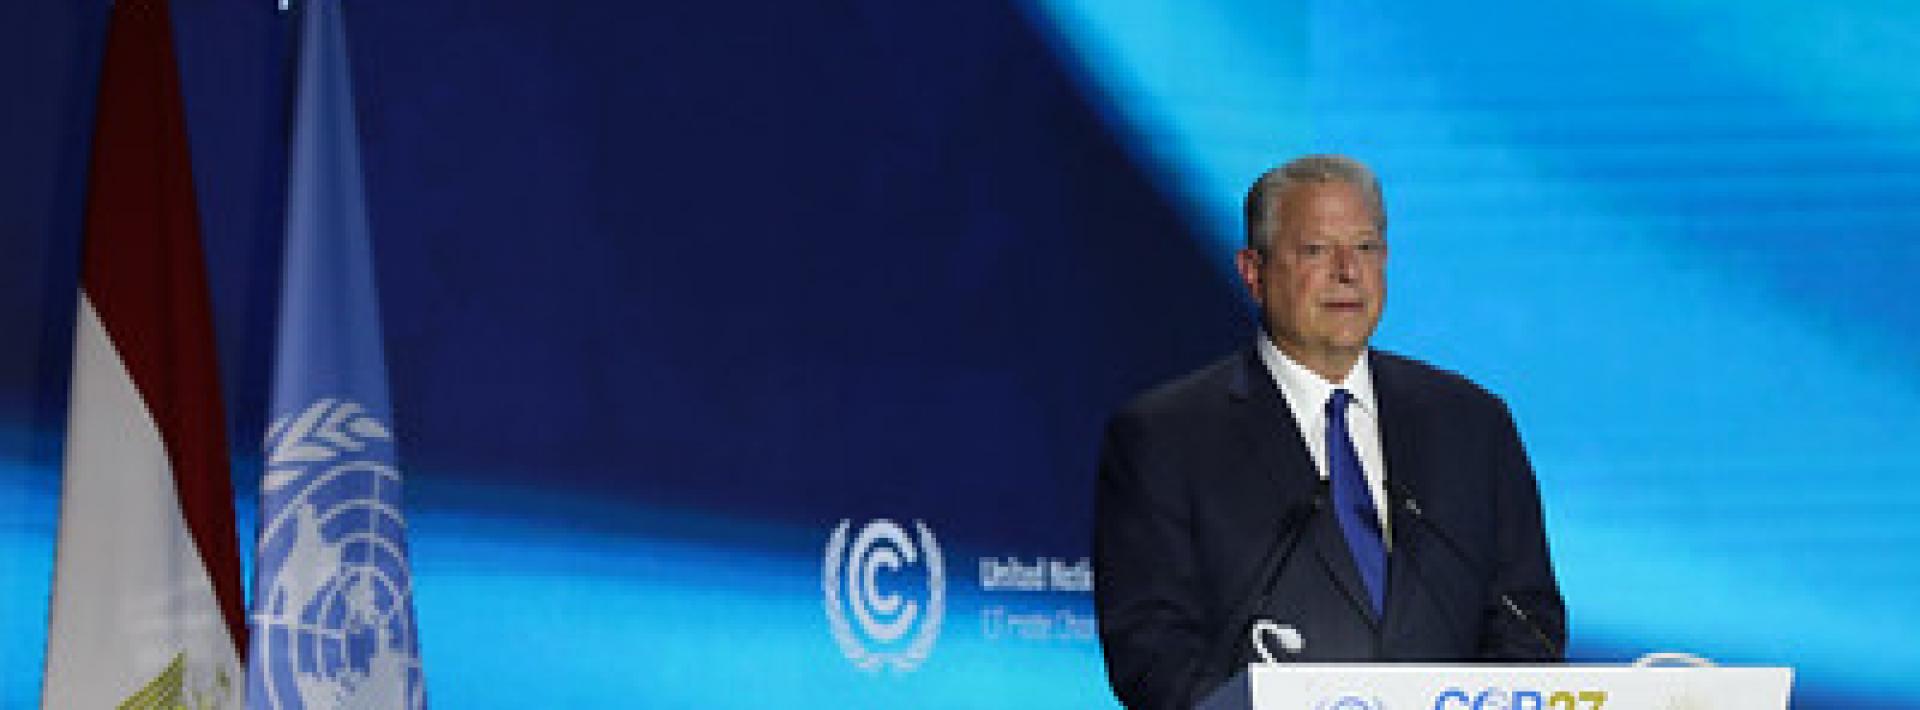 al gore standing on stage at a podium with a blue background, giving a speech at cop27